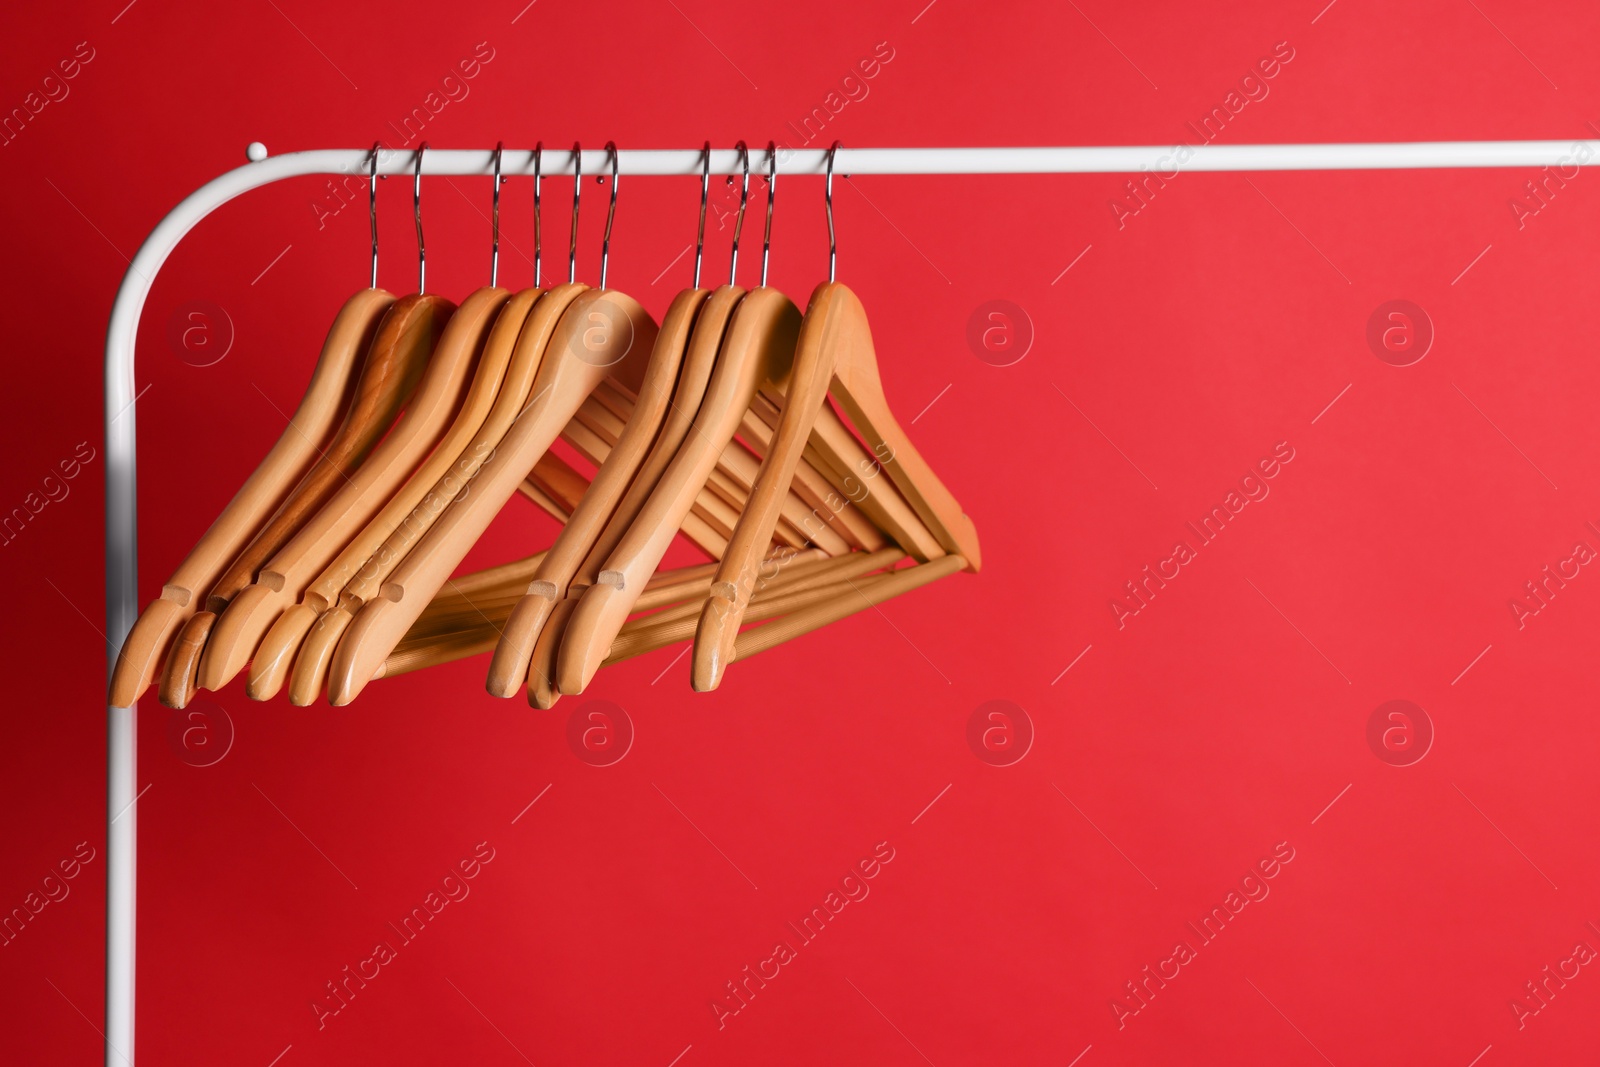 Photo of Wooden clothes hangers on metal rack against red background